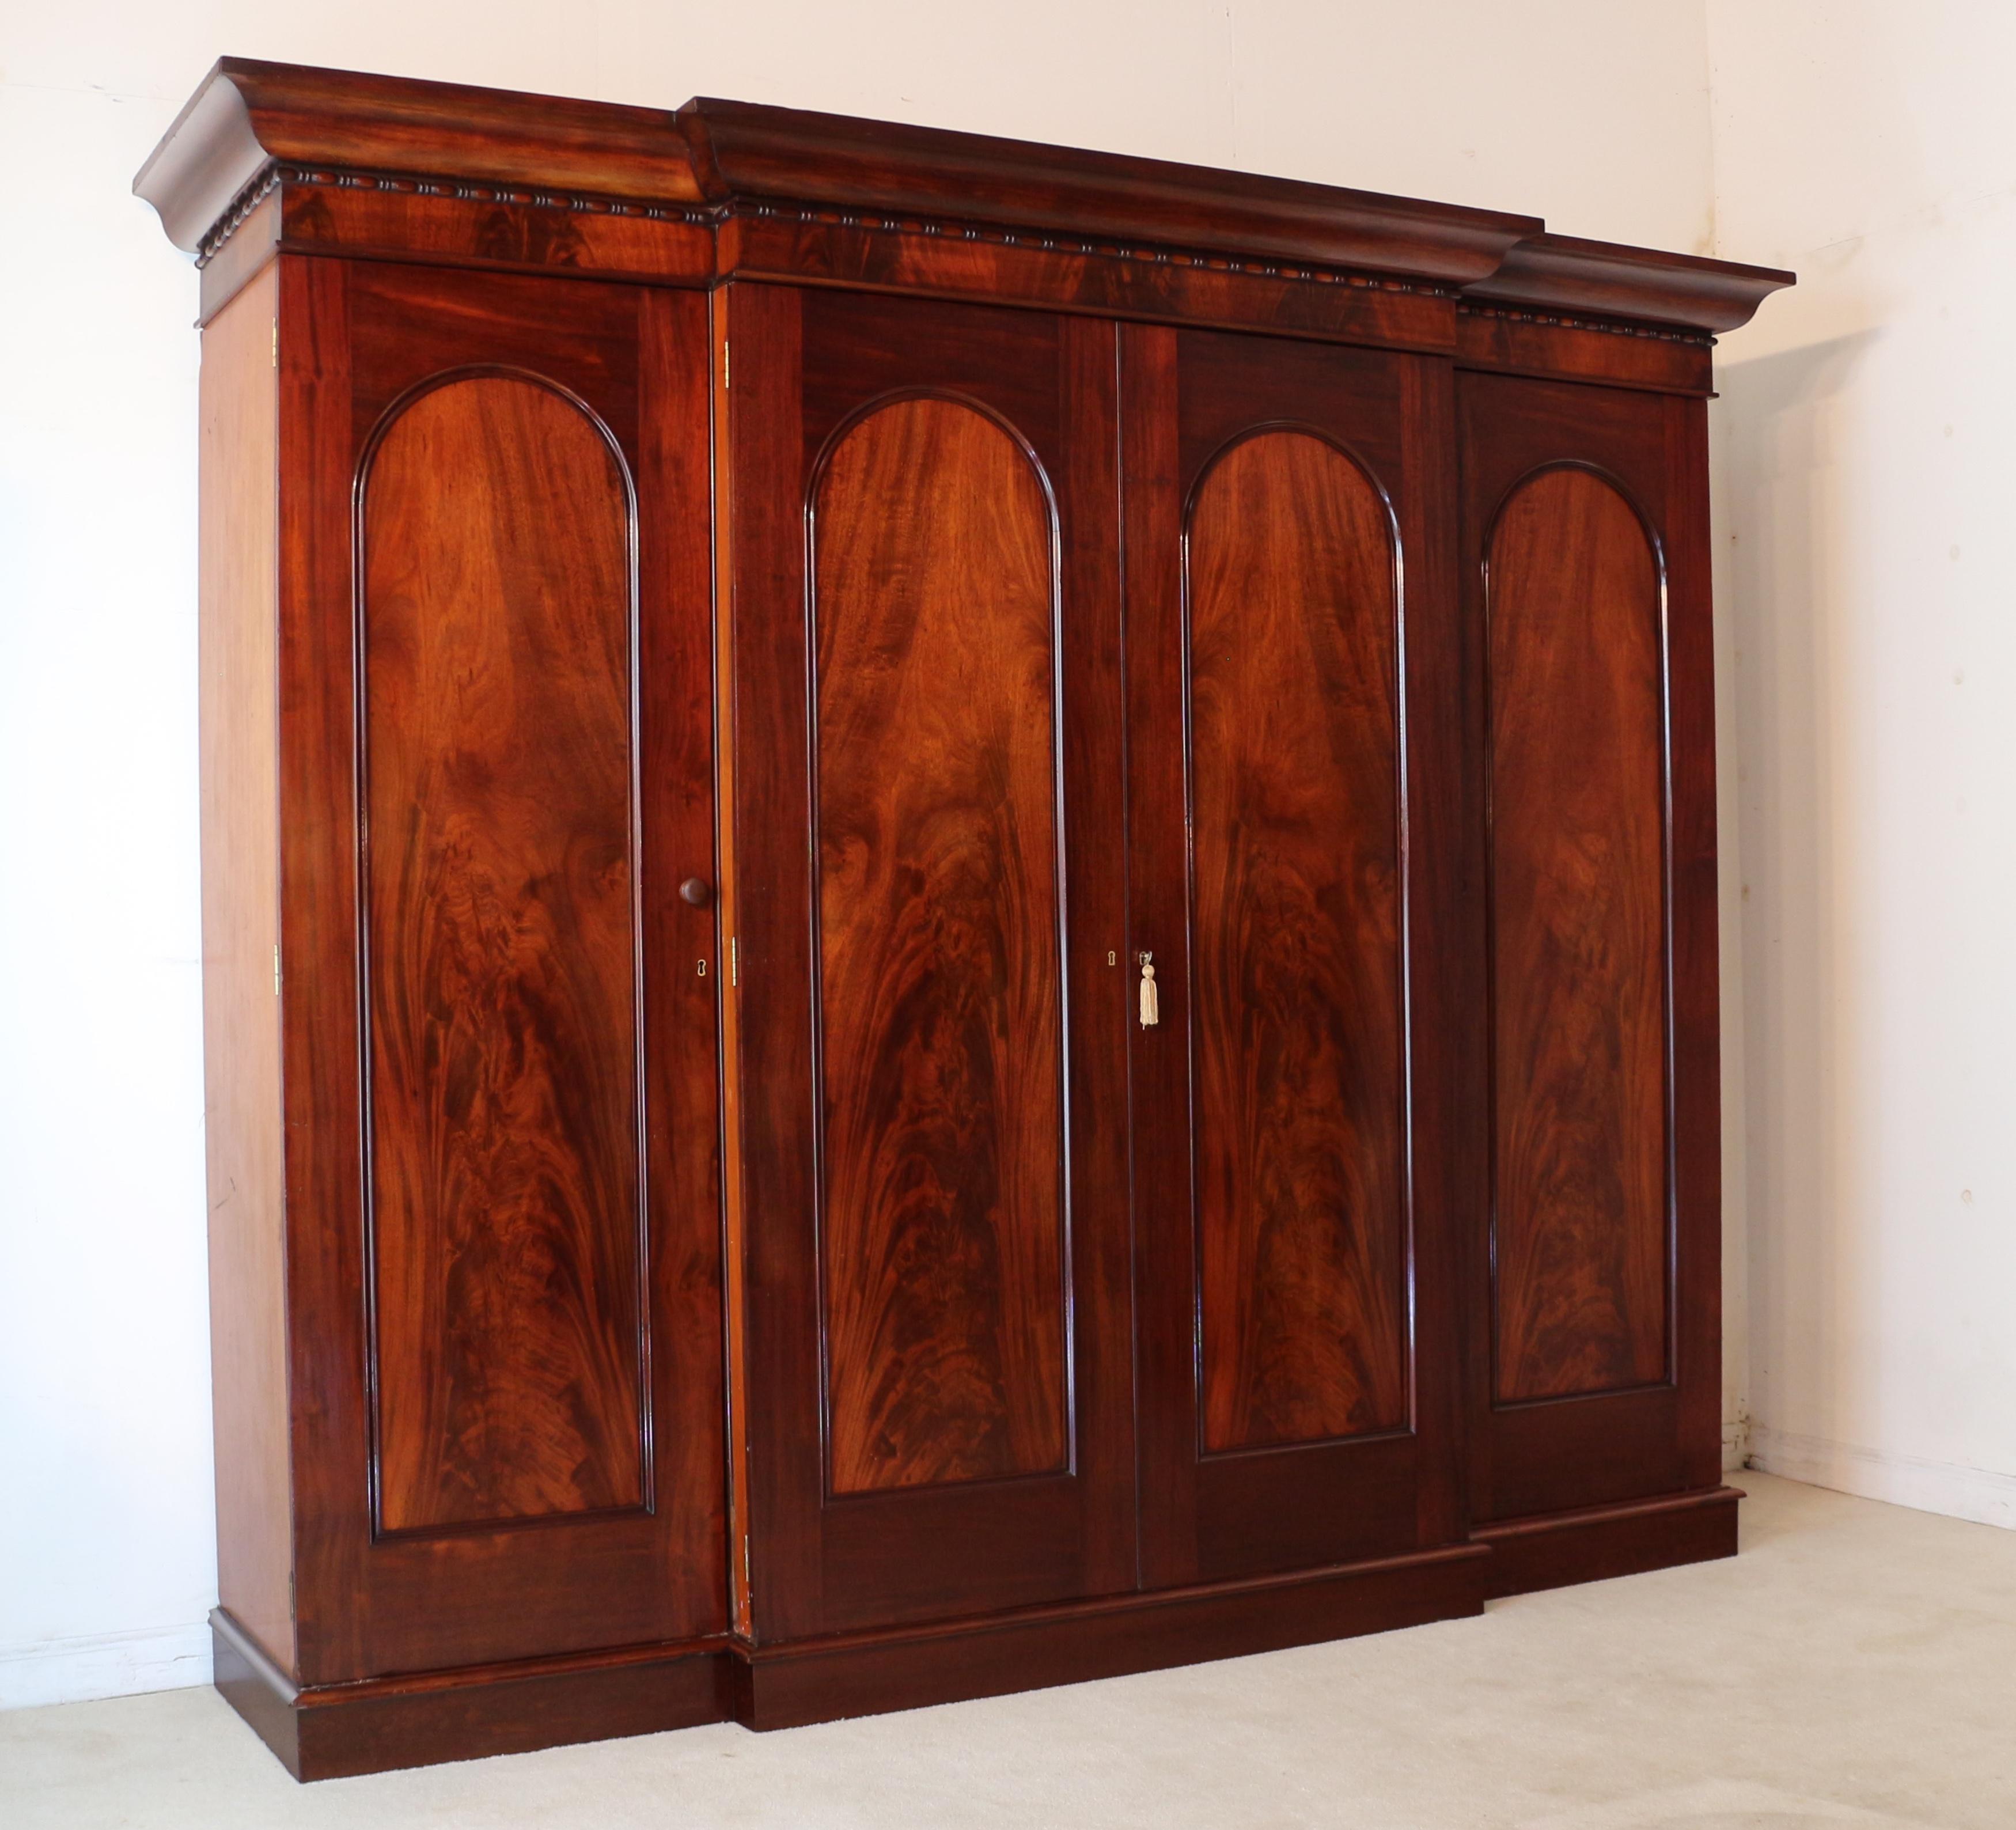 A superb quality and impressive Irish early Victorian flame mahogany breakfront gentleman’s wardrobe by Robert Strahan & Co of Dublin. Made with exceptional quality timbers it has an ogee shaped cornice and bead & reel moulded frieze highlighted by